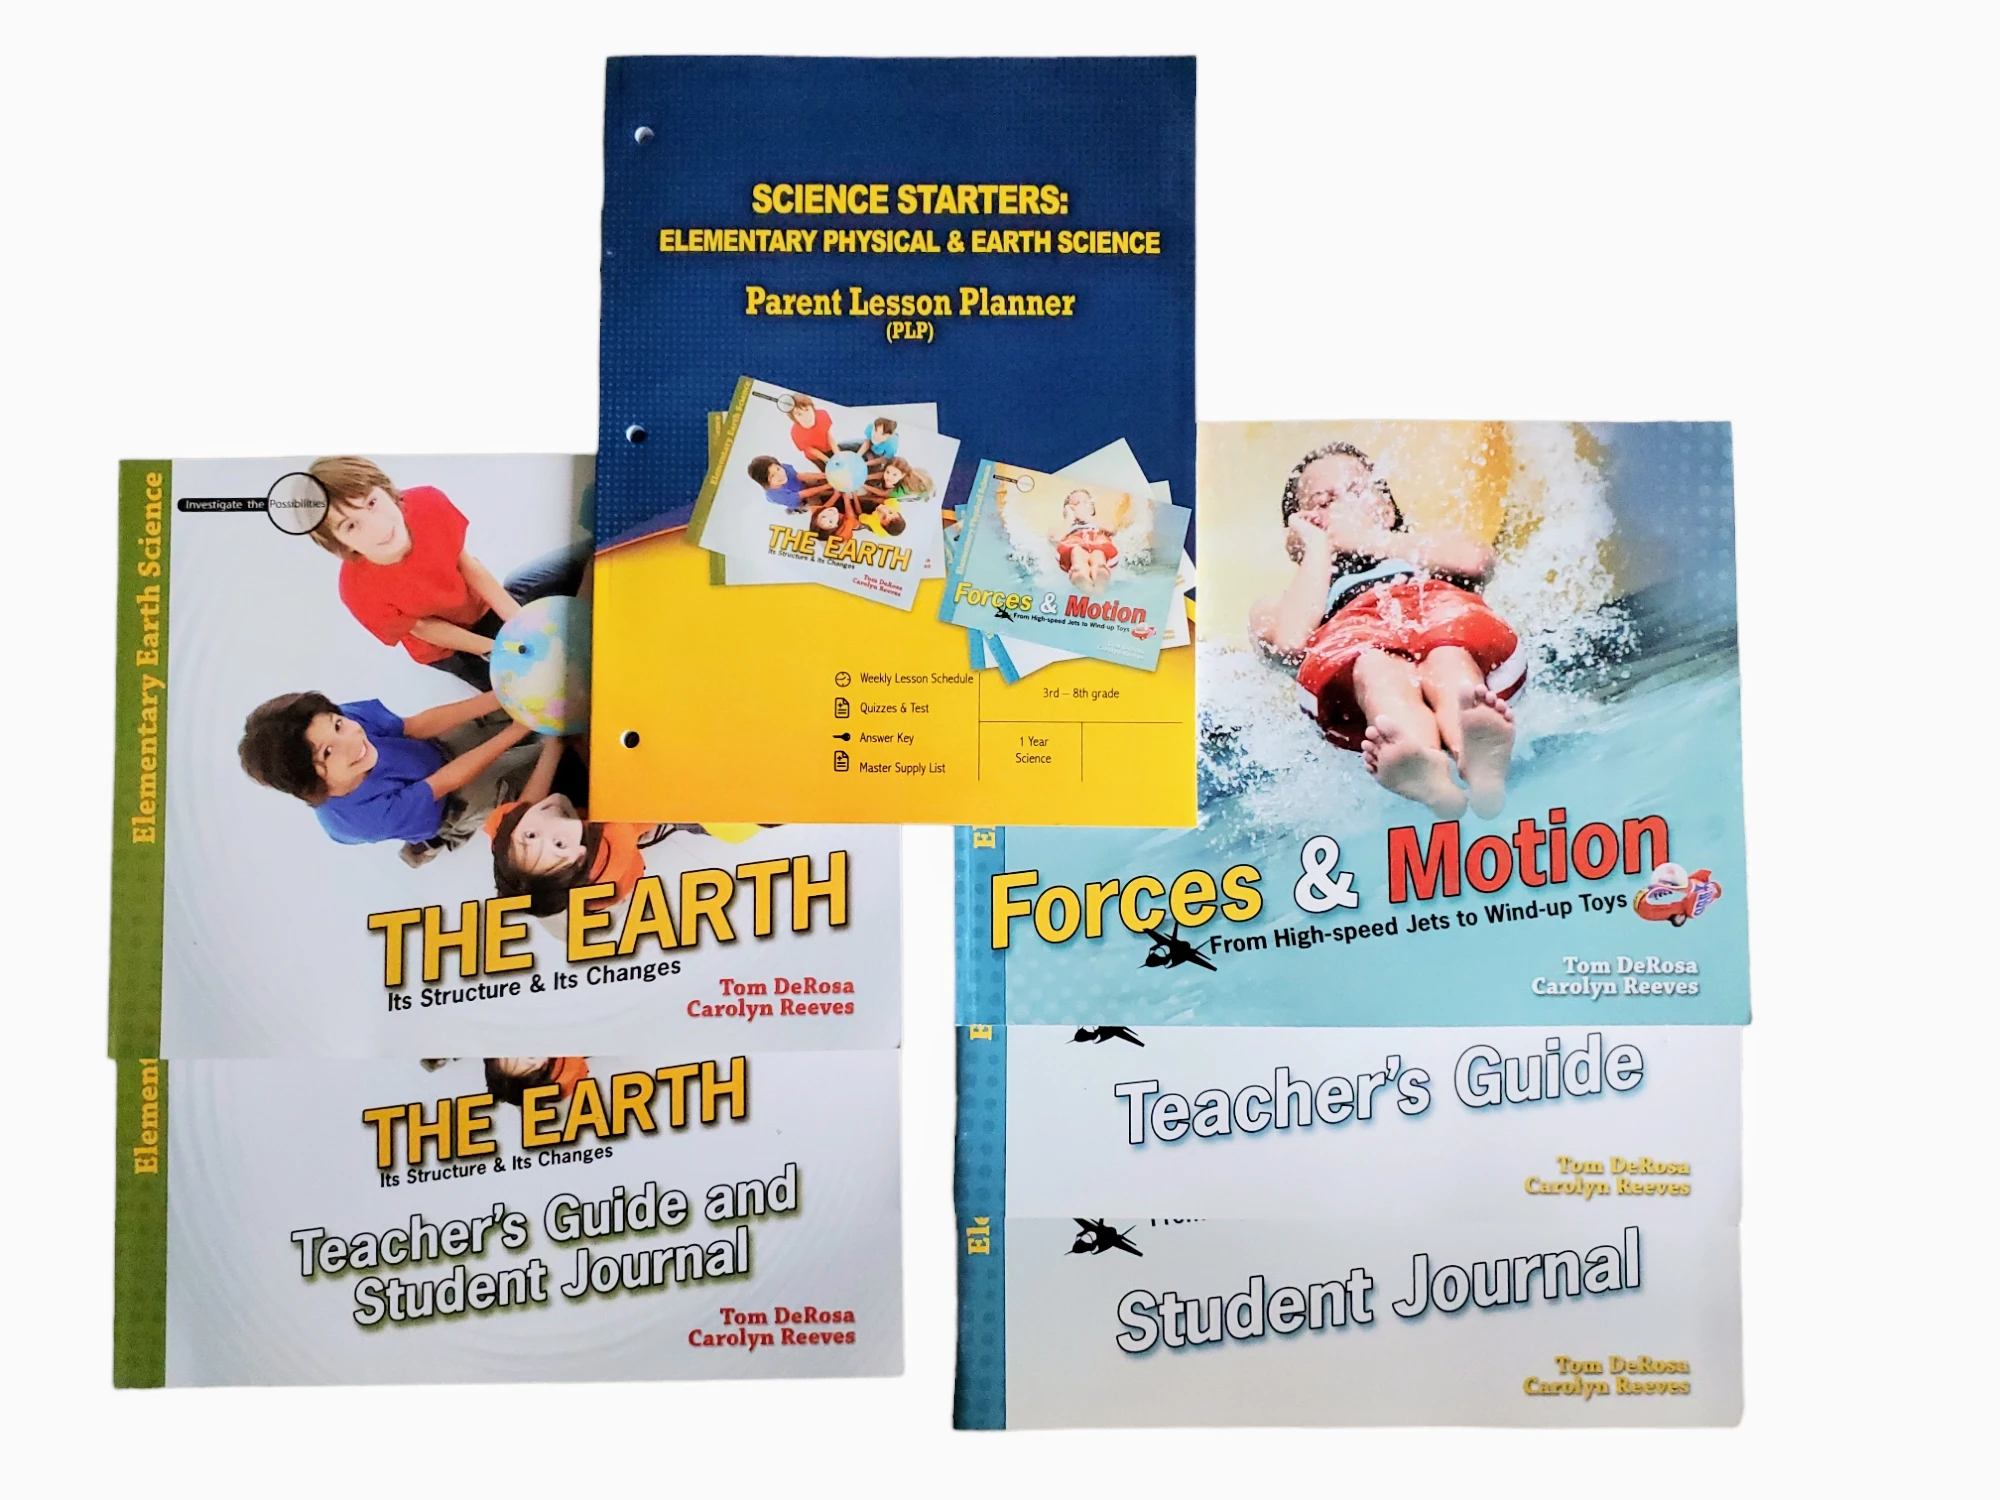 Masterbooks Science Starters Elementary Physical & Earth Science (6 books in set)